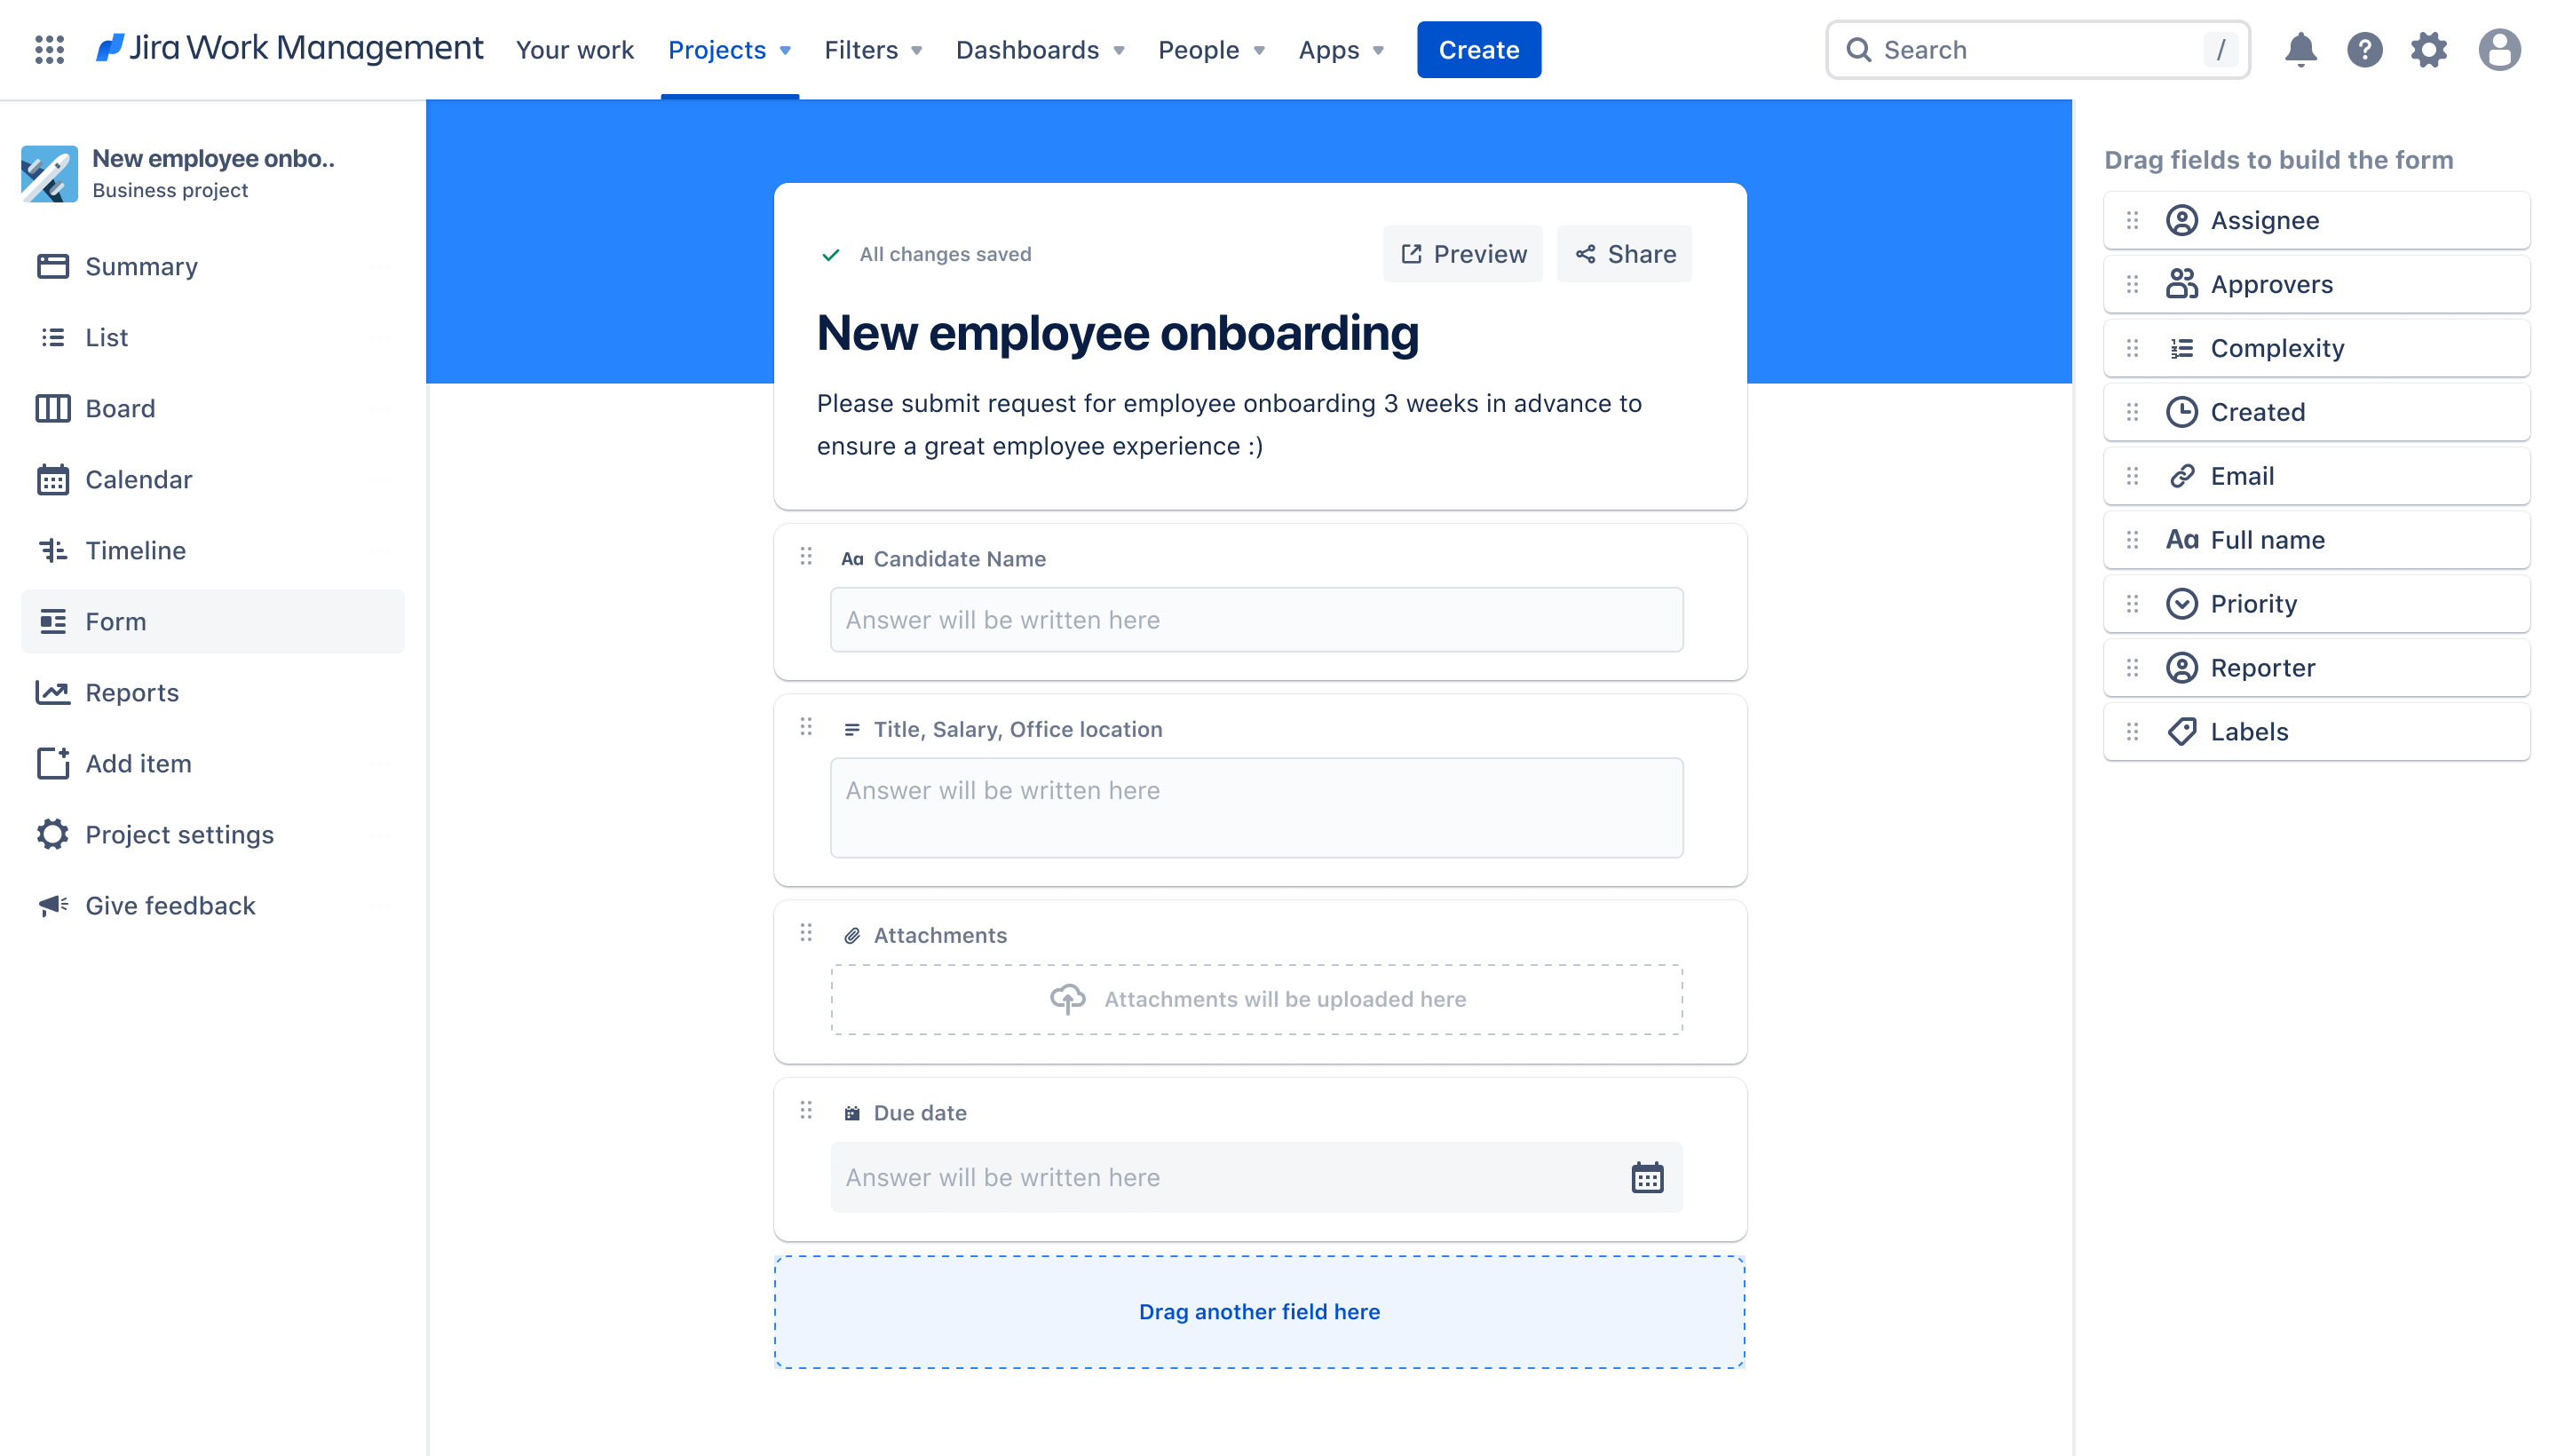 Form view in the new employee onboarding template for Jira Work Management